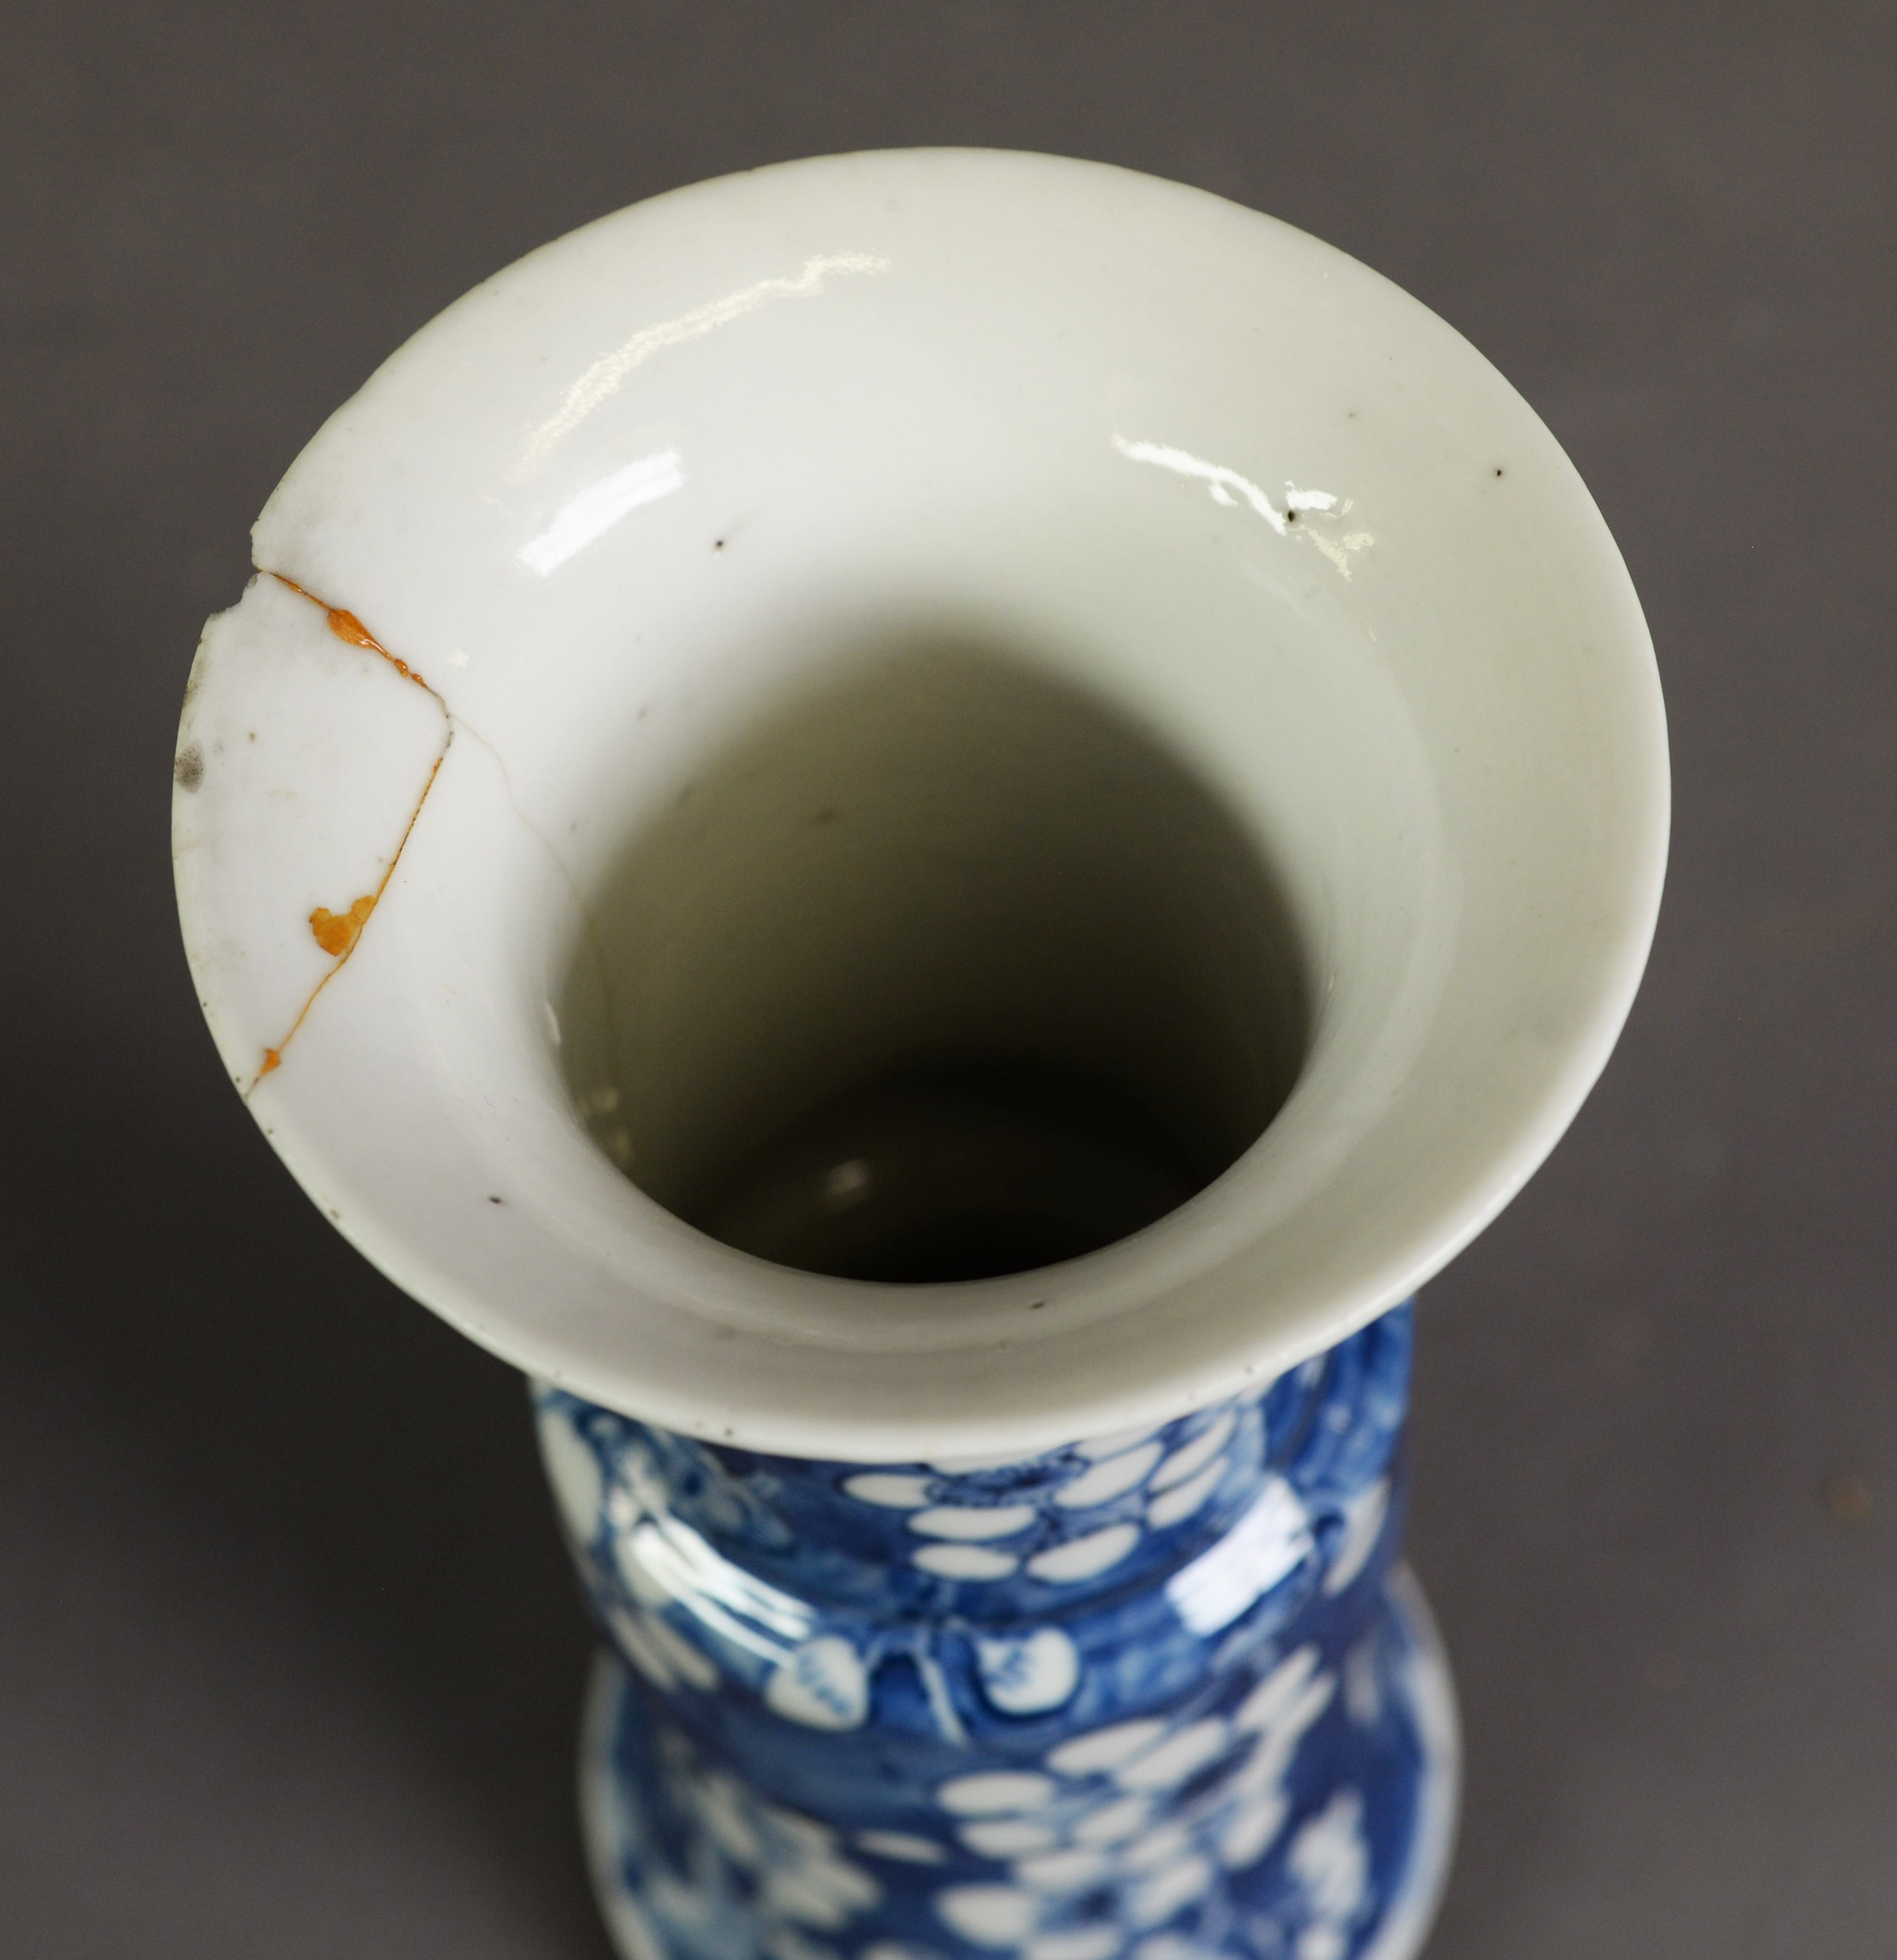 CHINESE LATE QING DYNASTY PORCELAIN GU SHAPE VASE, with everted rim, painted in underglaze blue with - Image 2 of 3